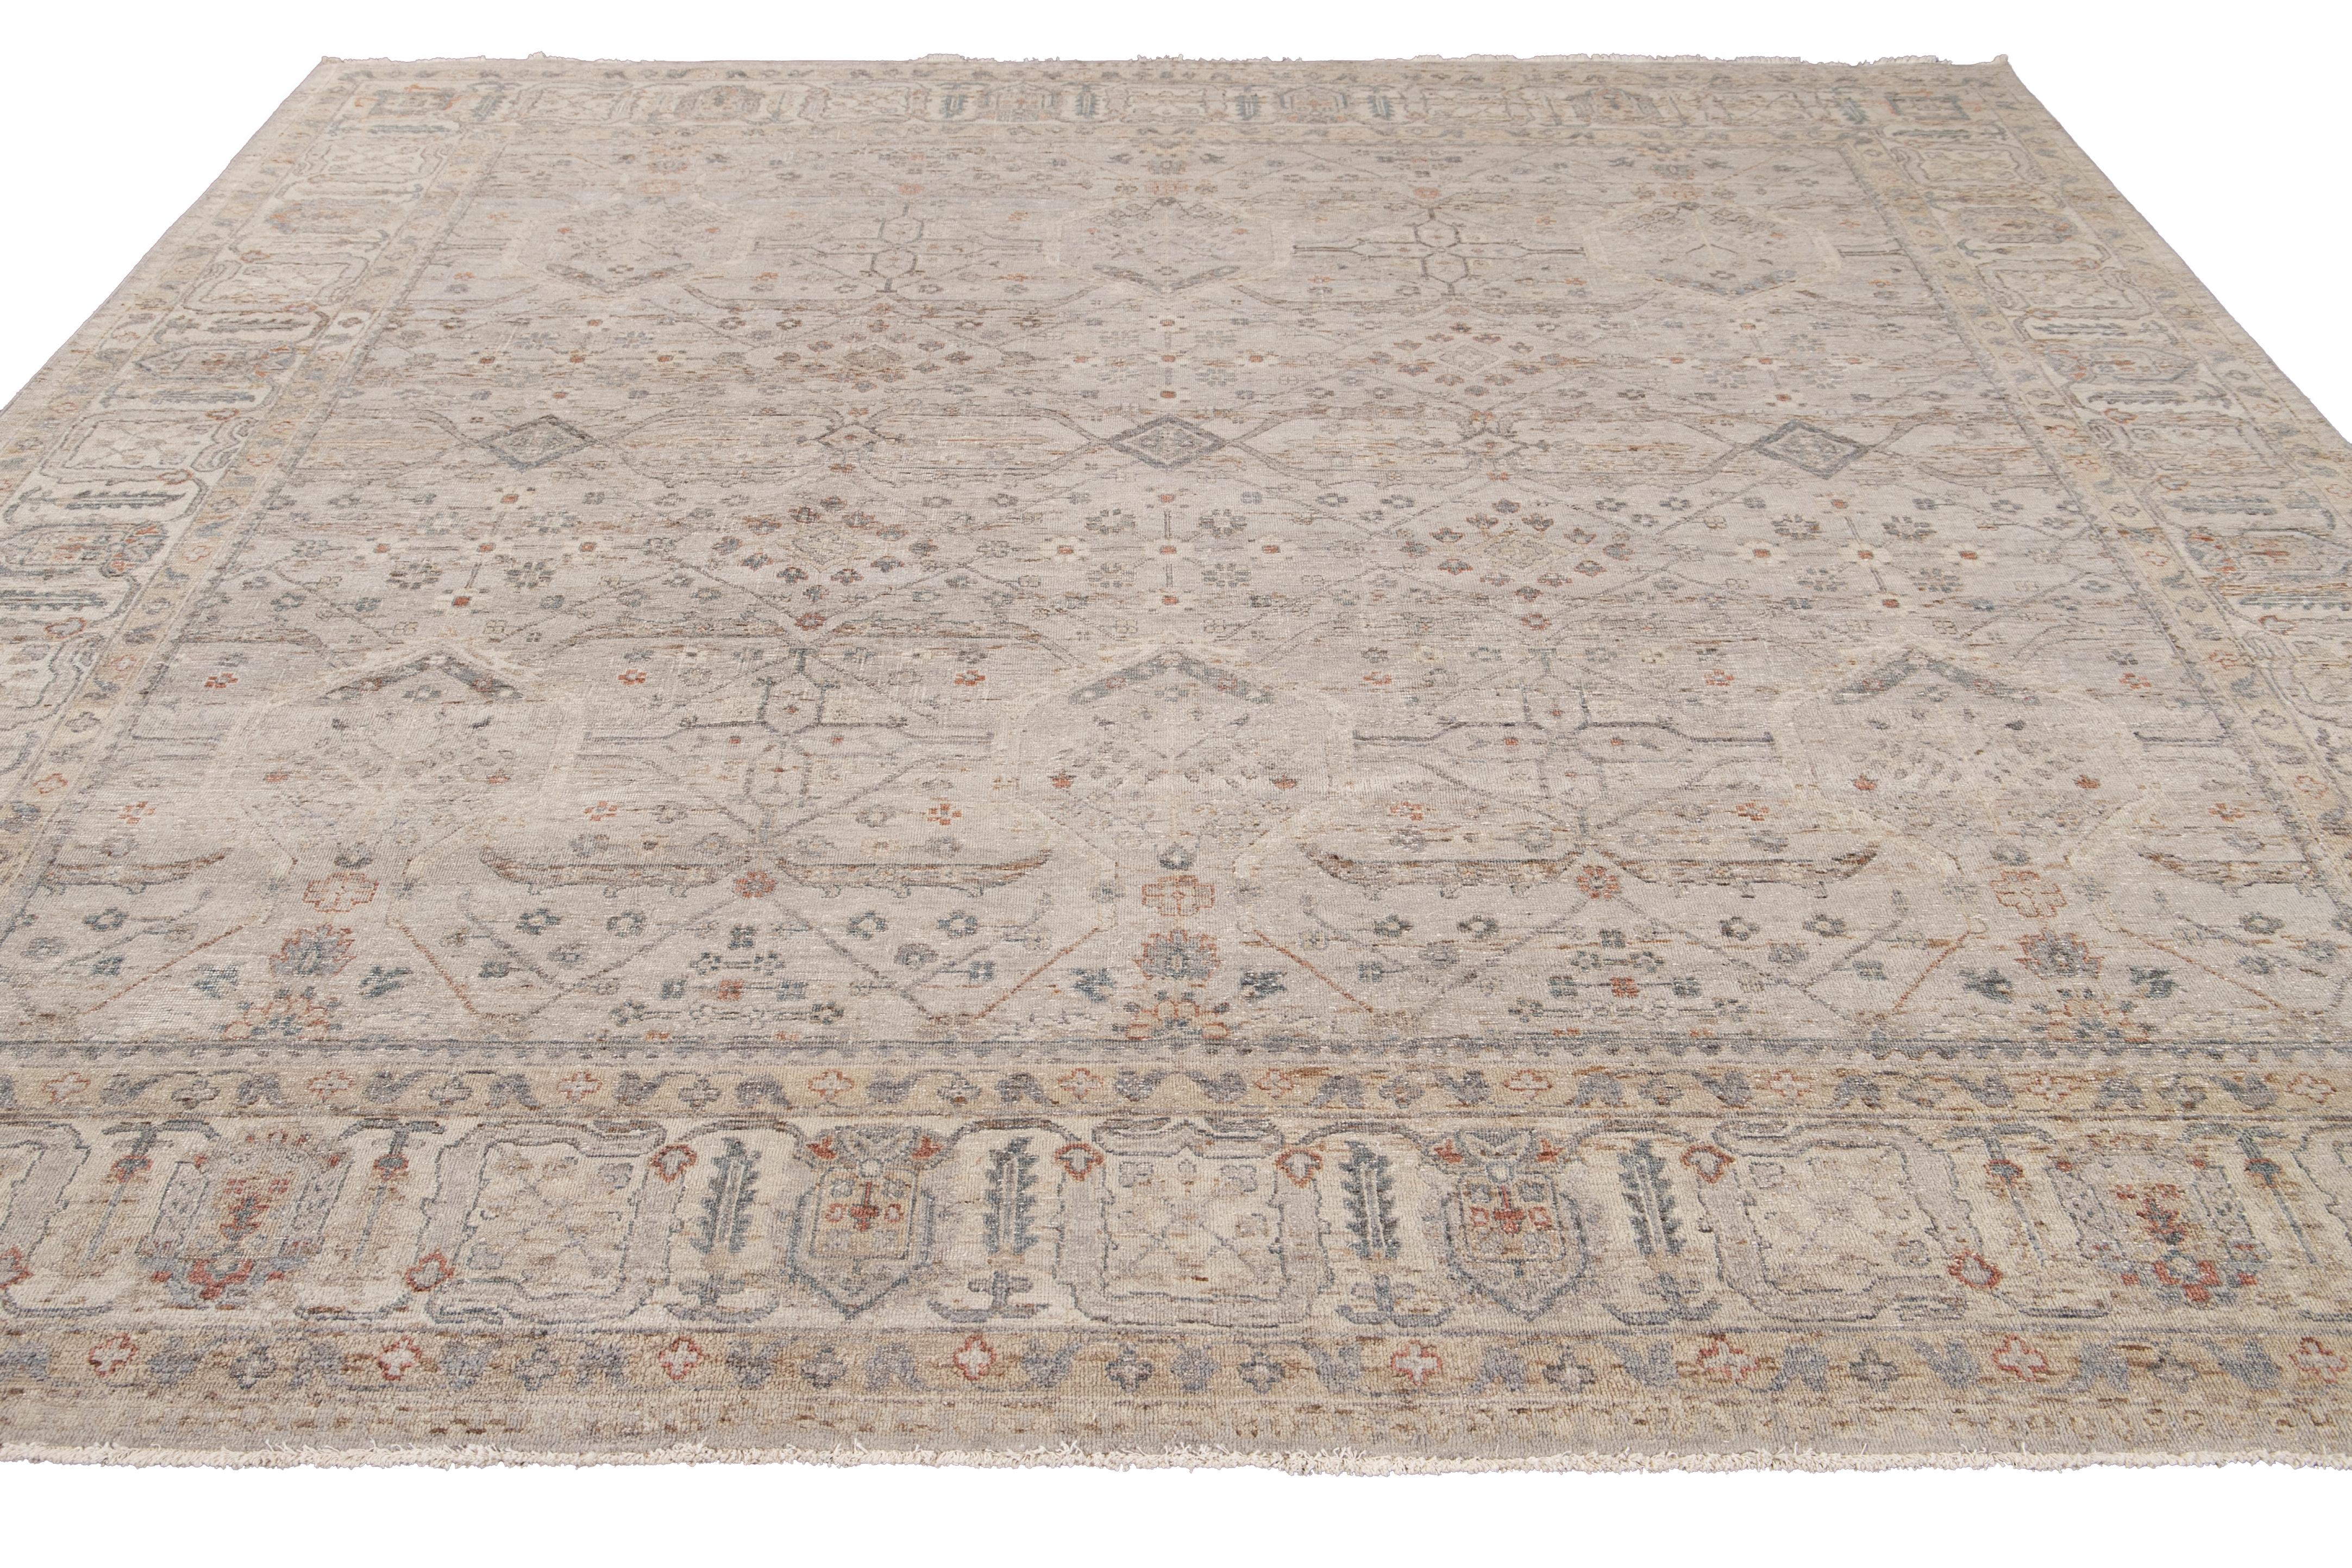 21st Century Contemporary Indian Square Wool Rug 8